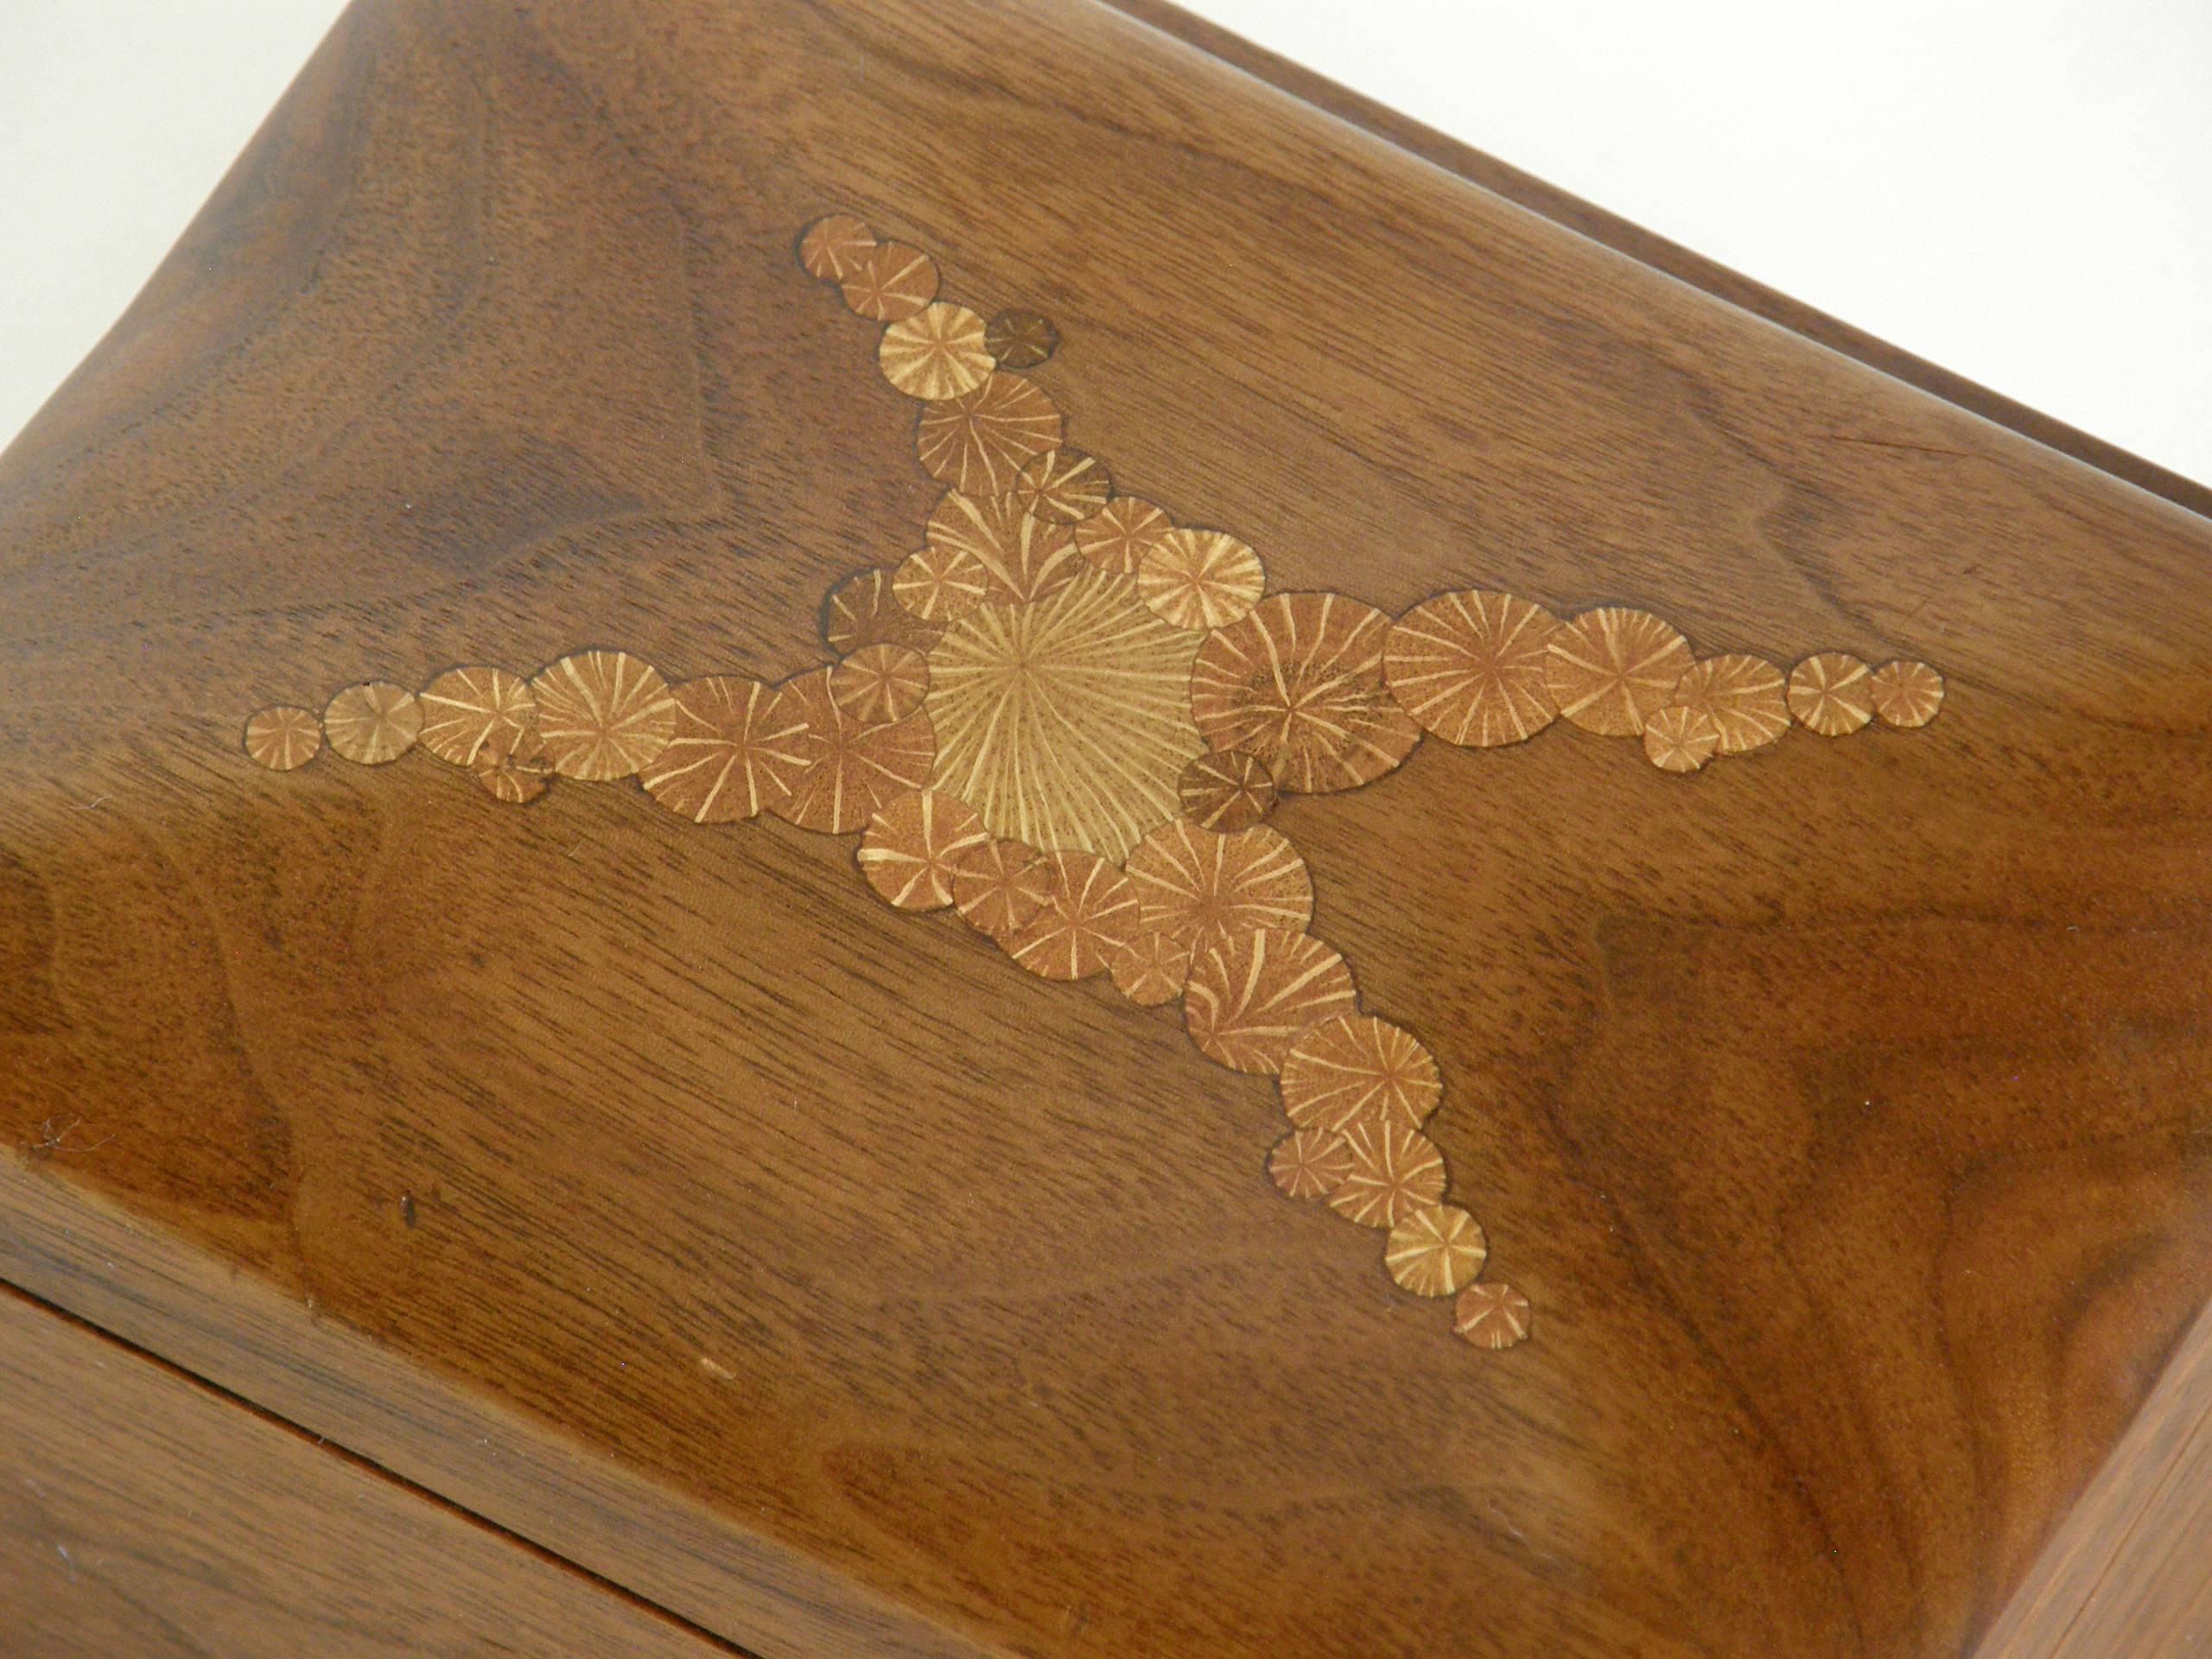 Carved walnut box by Roger Sloan with oak root cross sections inlaid on the undulating surface of the lid. The wooden hinge is beautifully made and has a strong and elegant stop running the length of its back that allows the lid to stay comfortably